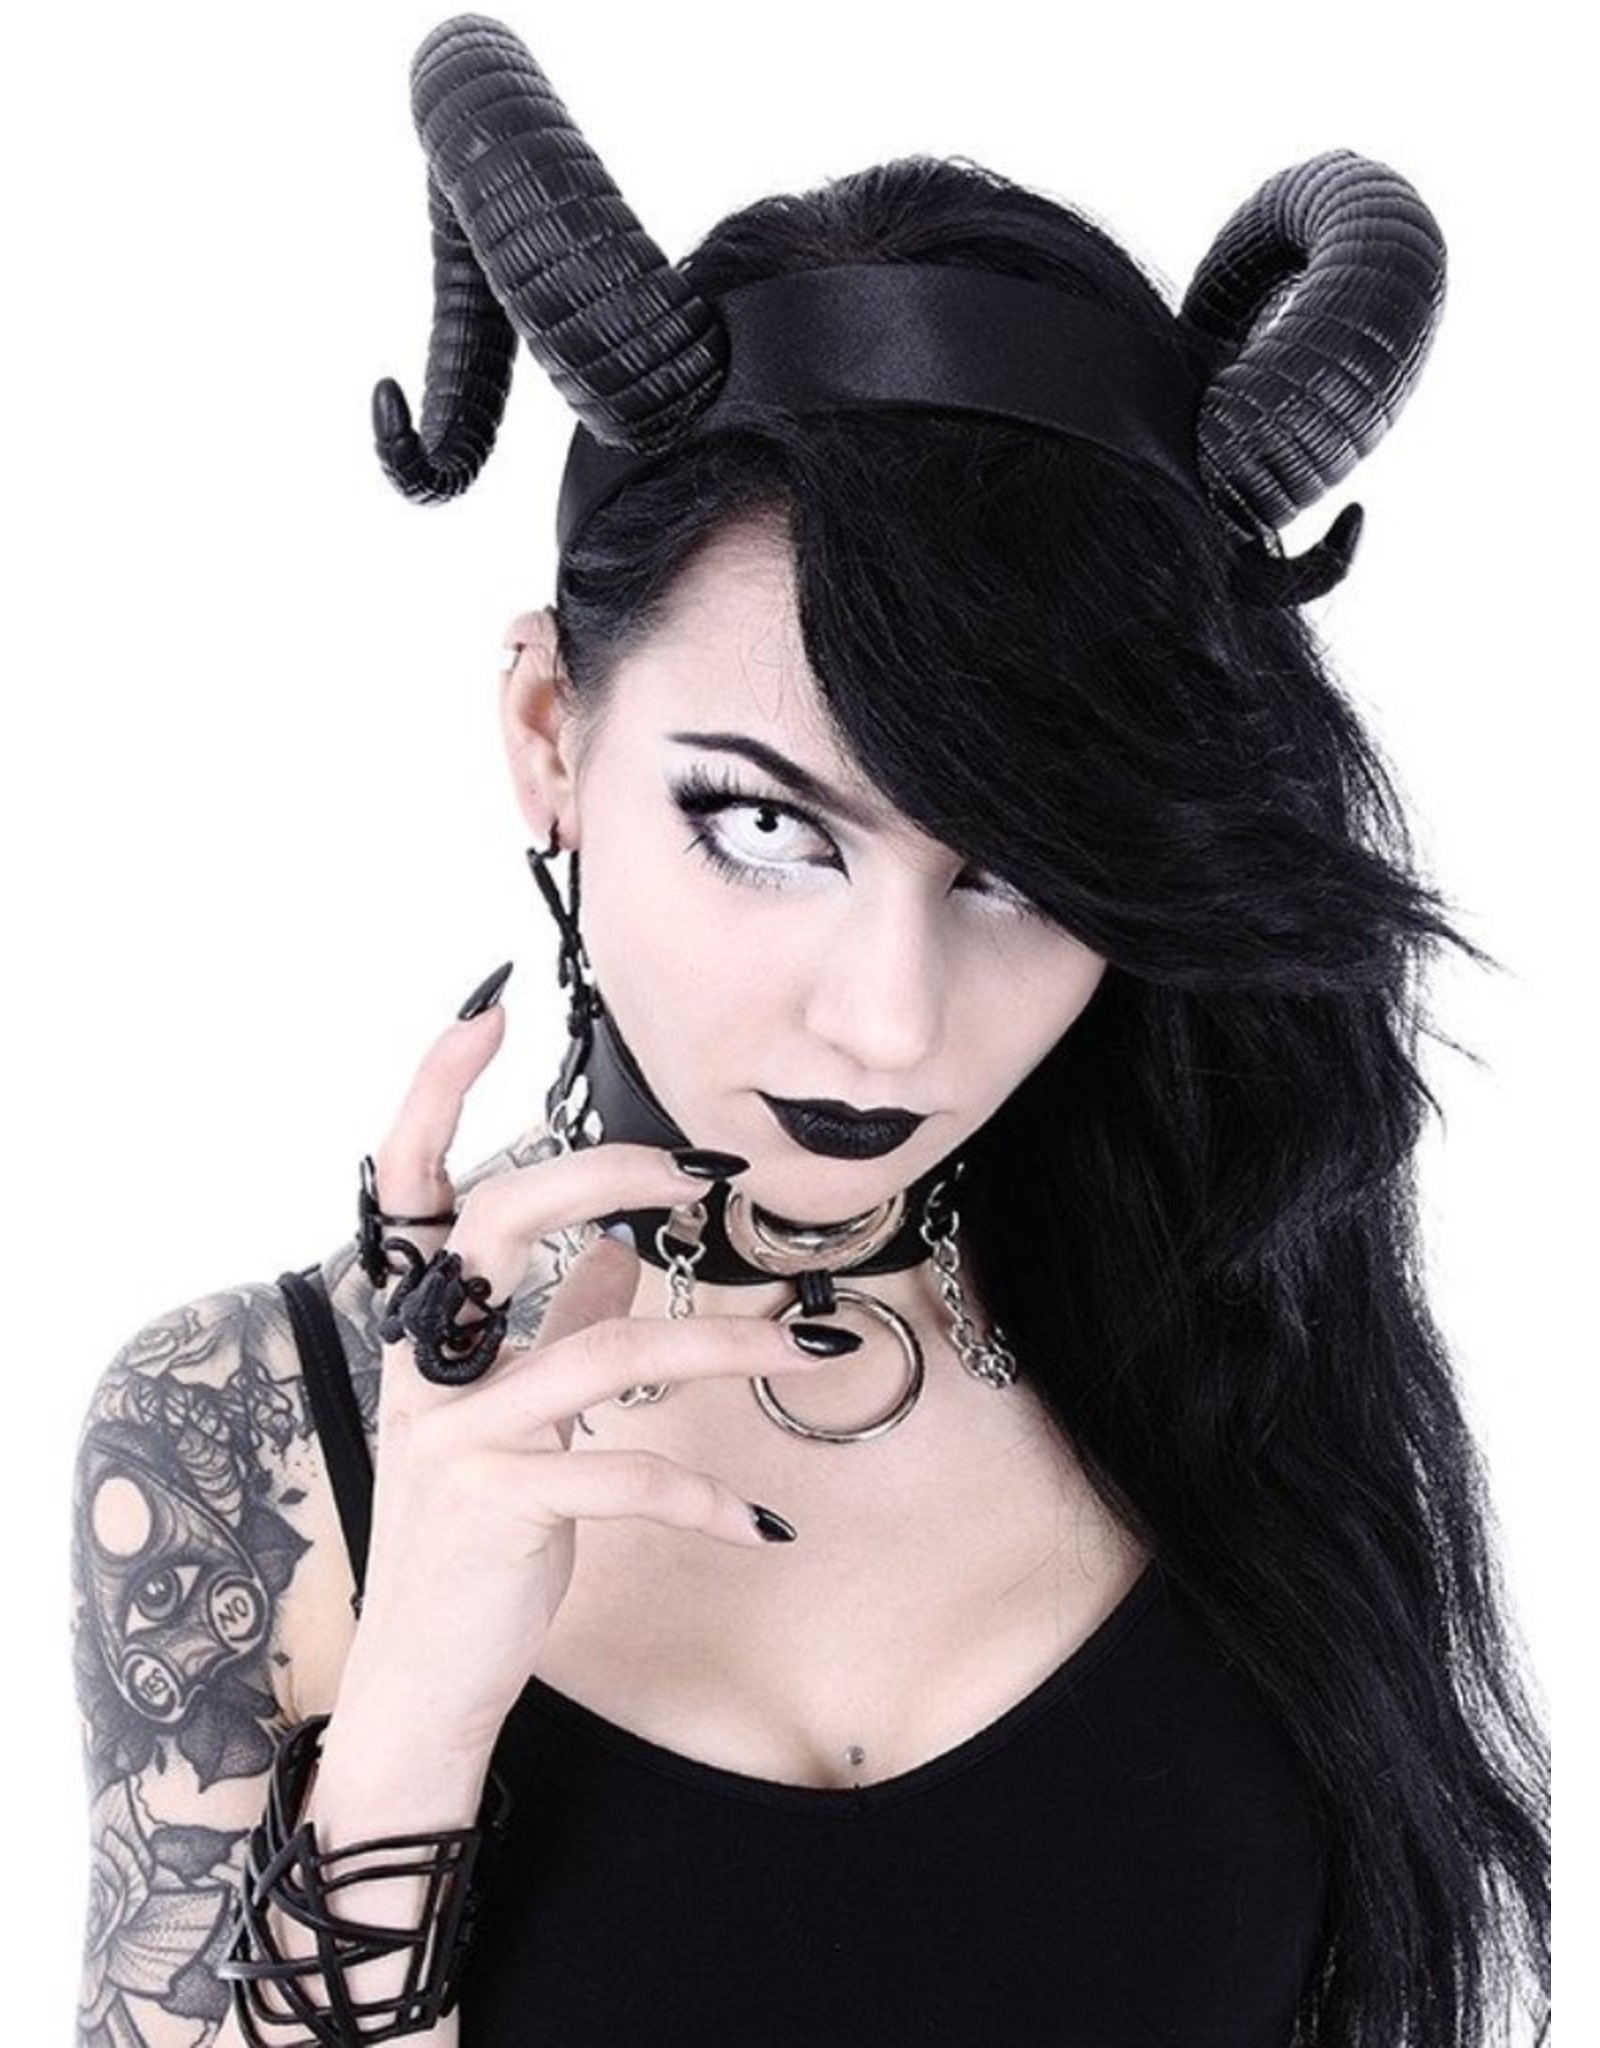 Restyle Gothic and Steampunk accessories - Ram Horns Gothic and Fantasy headband Sinister